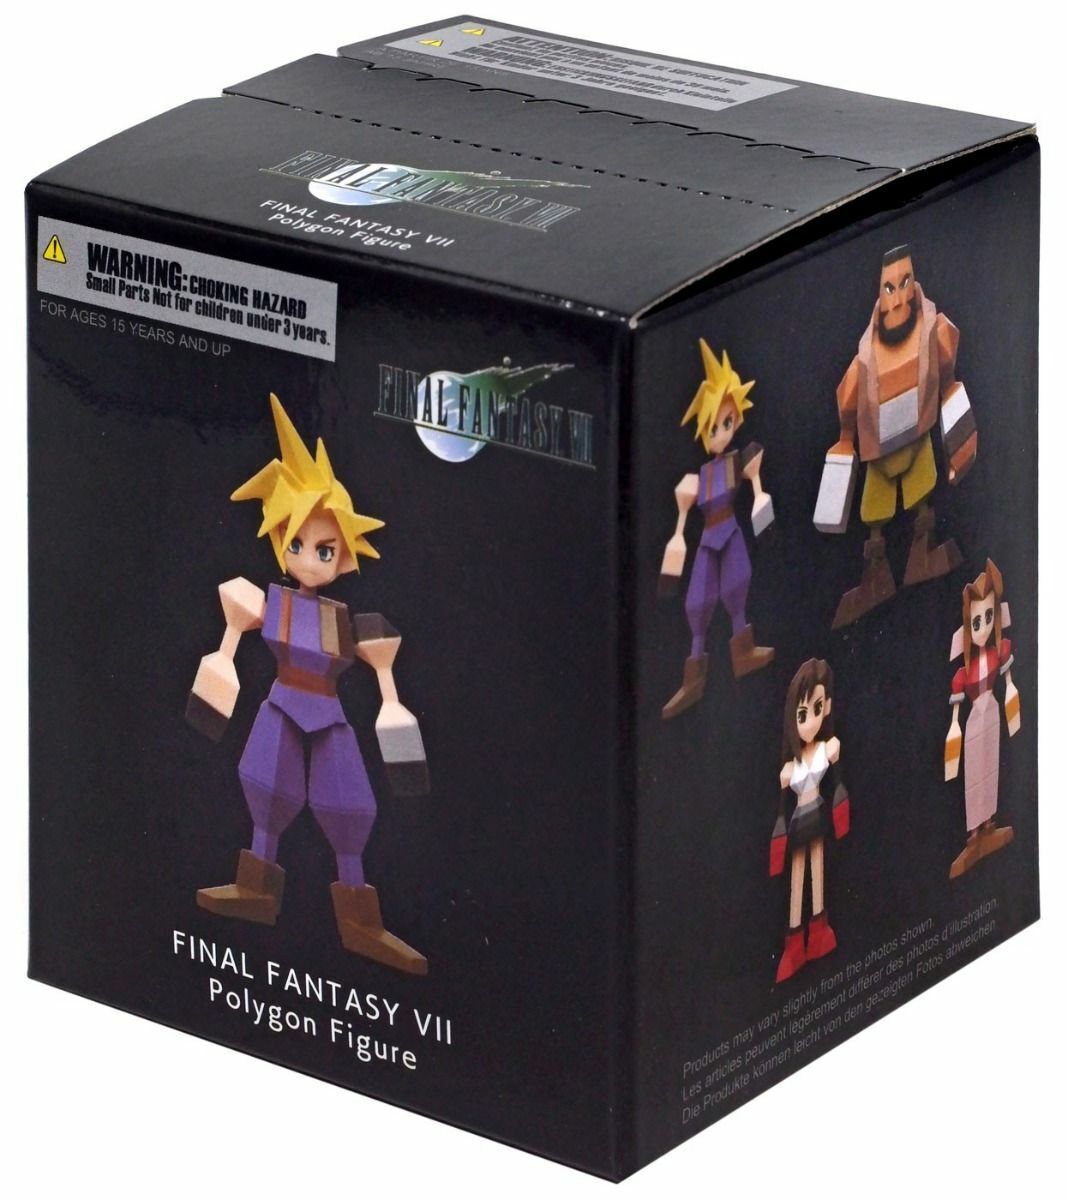 FINAL FANTASY VII Polygon Square Enix One Character Blind Box Figure